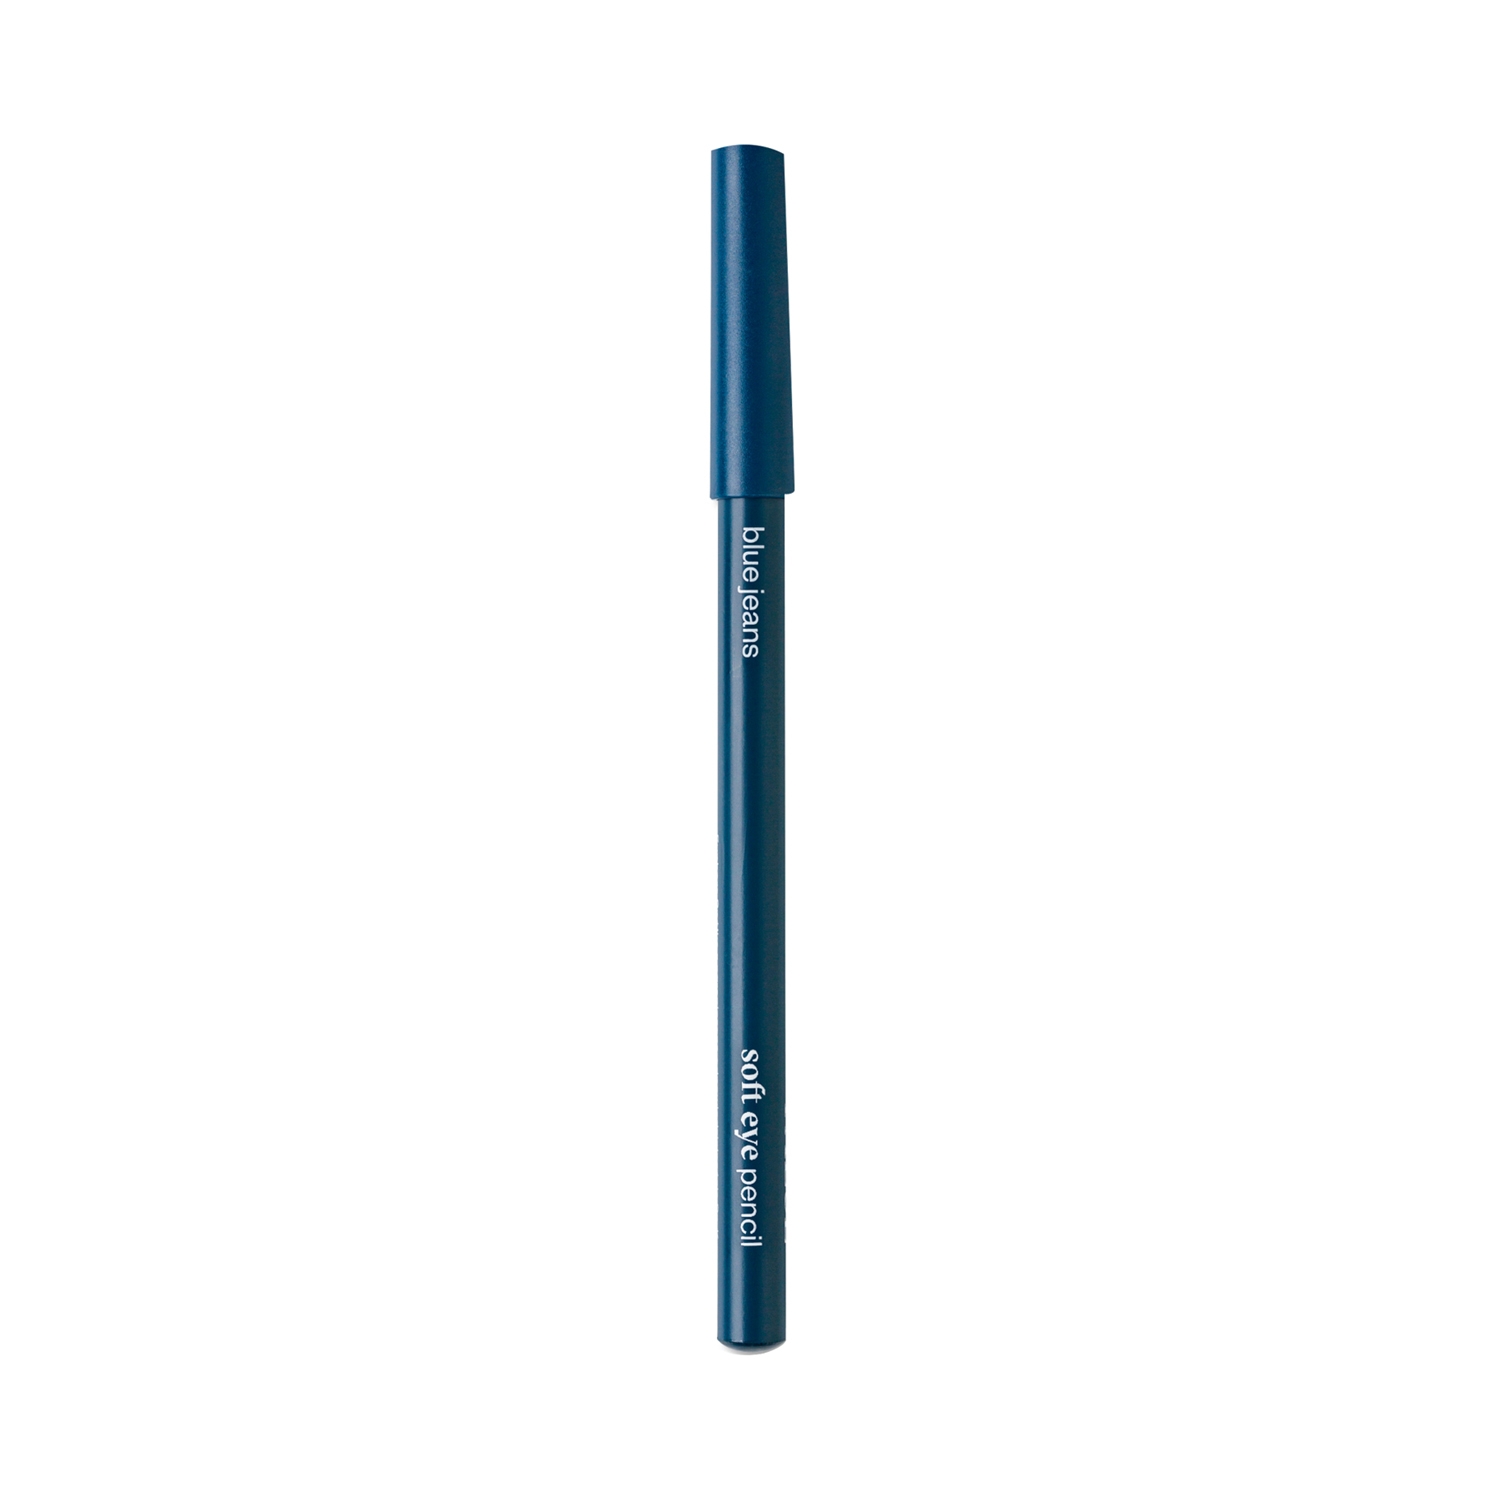 Paese Cosmetics | Paese Cosmetics Soft Eye Pencil - 04 Blue Jeans (1.5g)